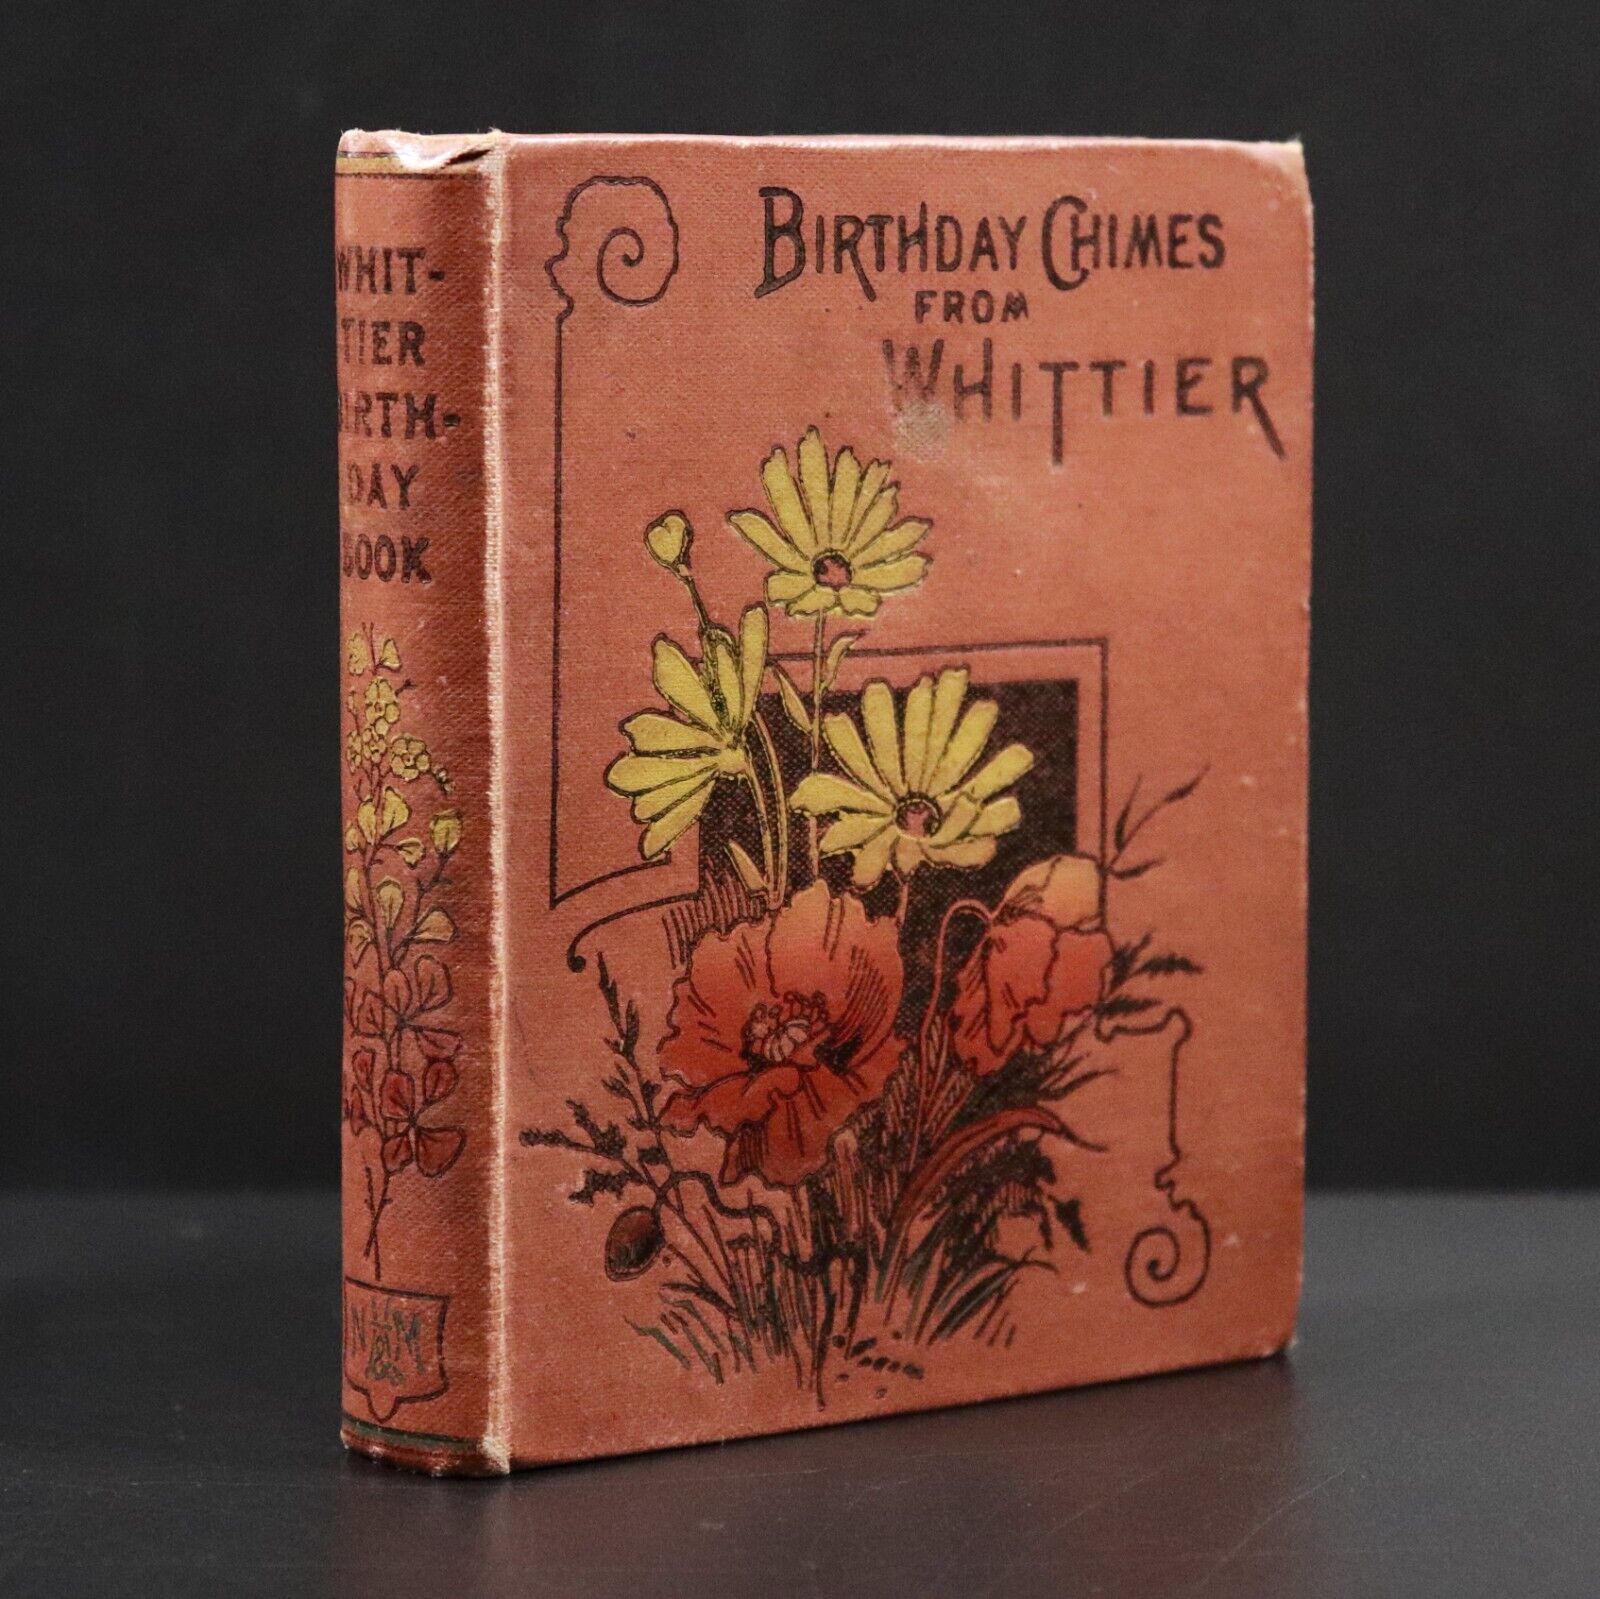 c1900 Birthday Chimes From John Greenleaf Whittier Antique Poetry Diary Book